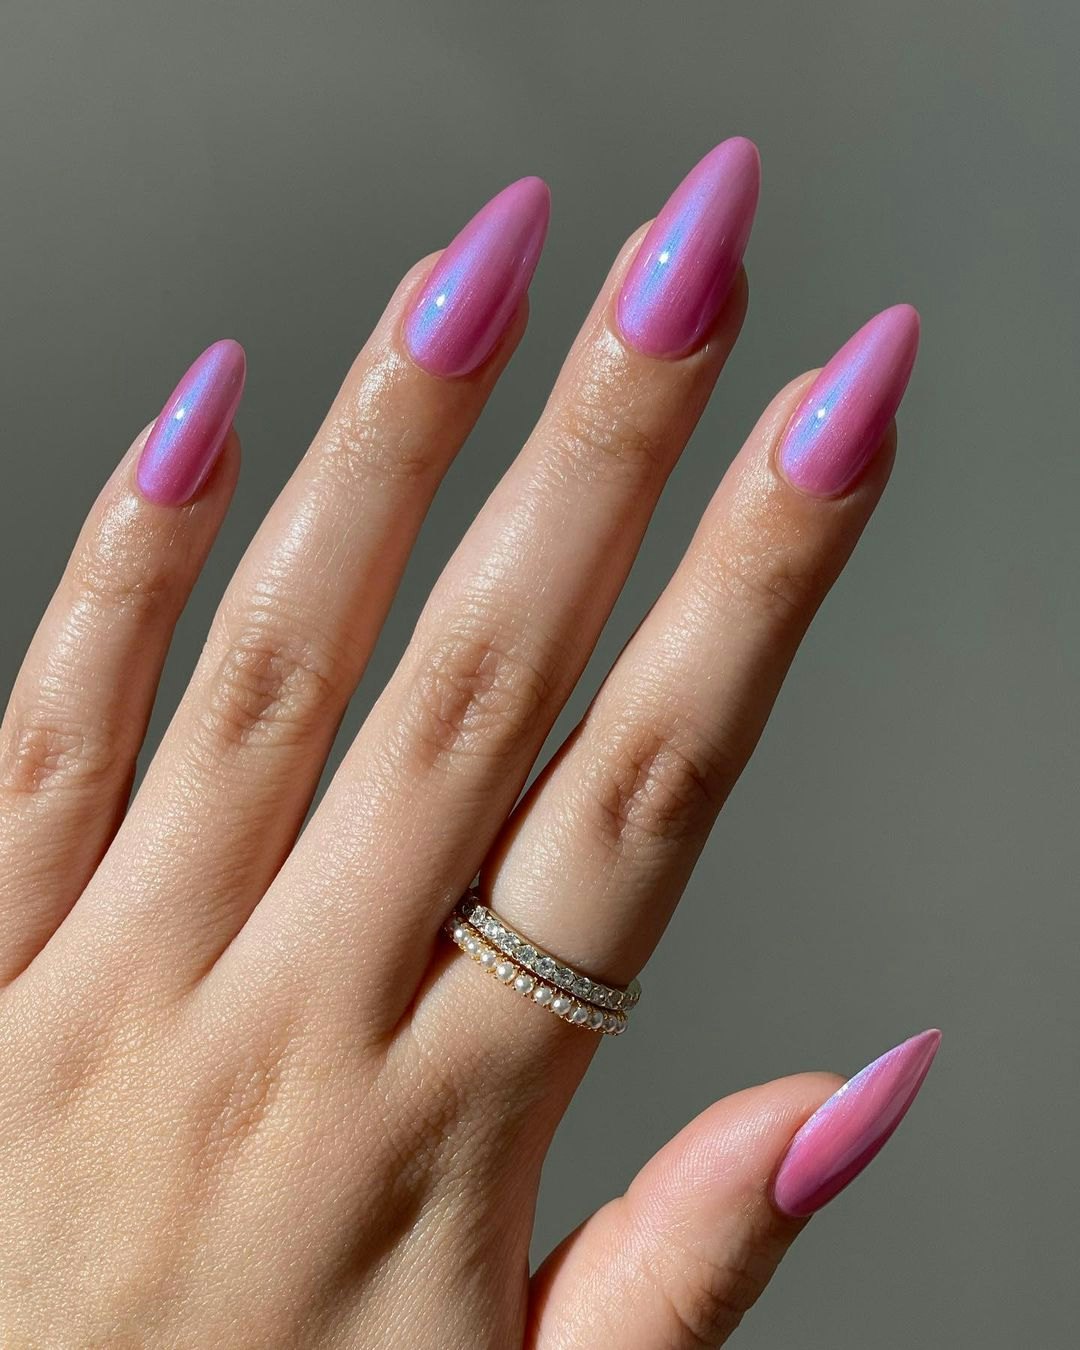 11 Nail Trends You'll See in 2021 - Popular Nail Colors and Shapes